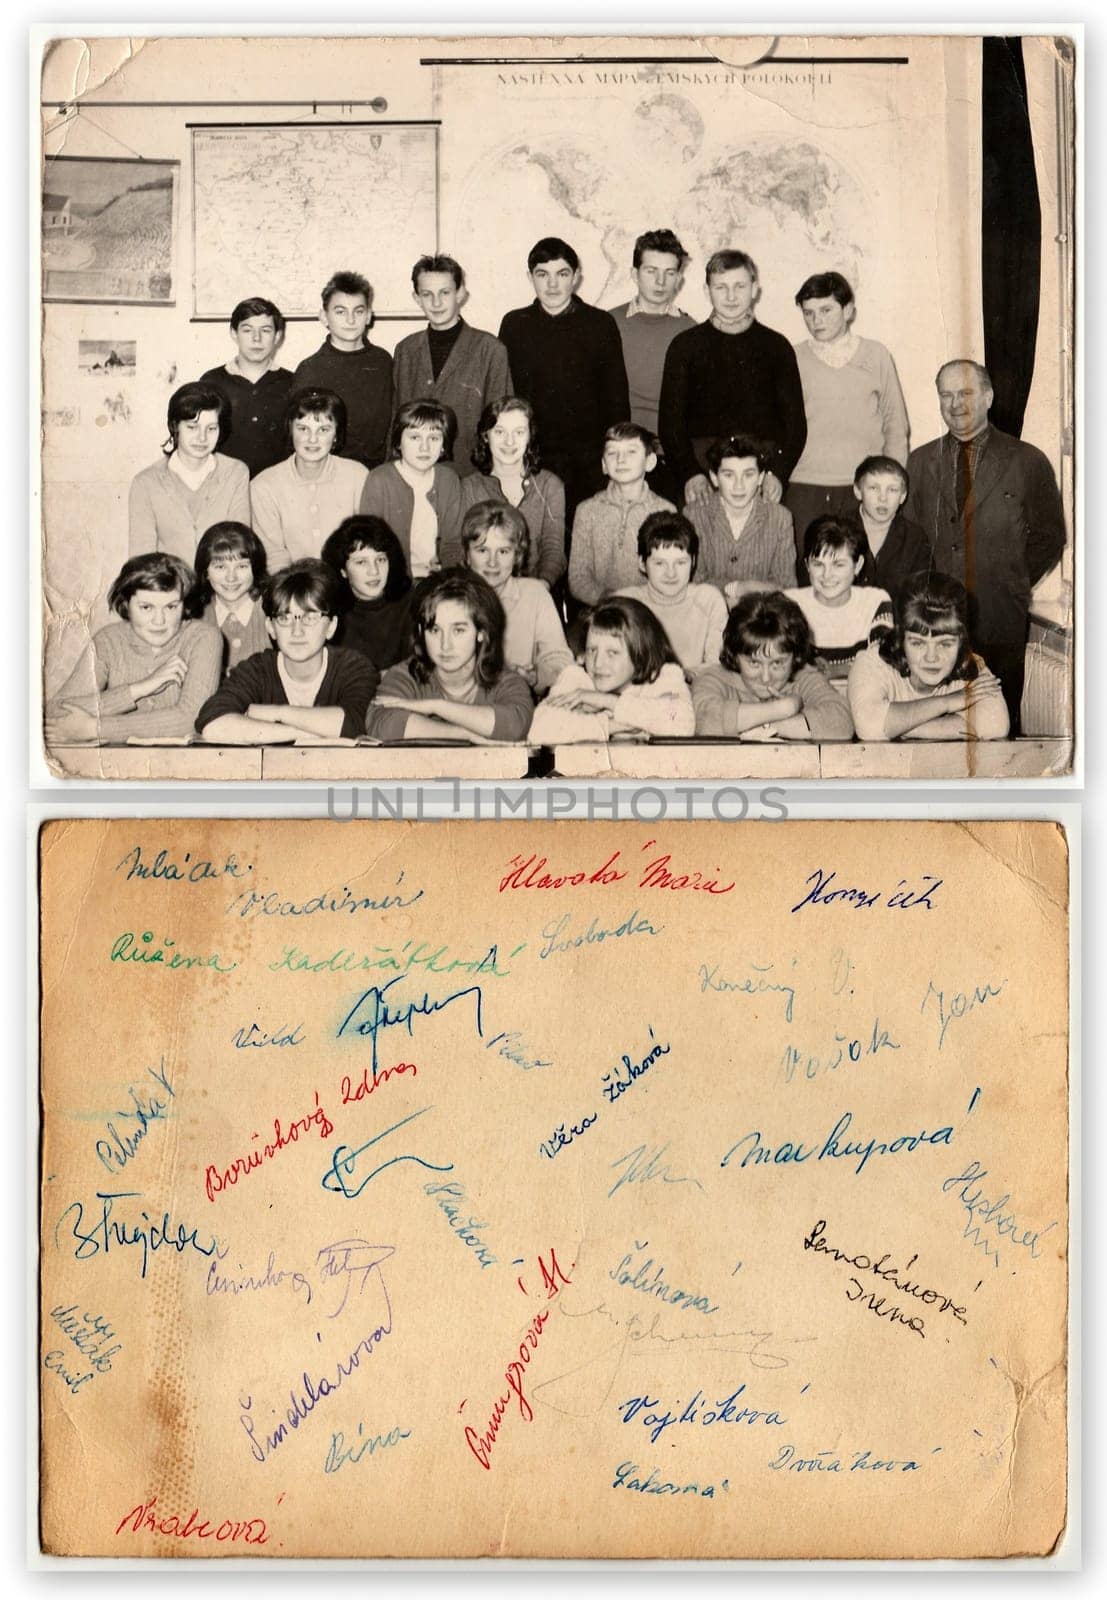 Retro photo shows students with male teacher in the classroom. The back of vintage photo shows signatures. by roman_nerud